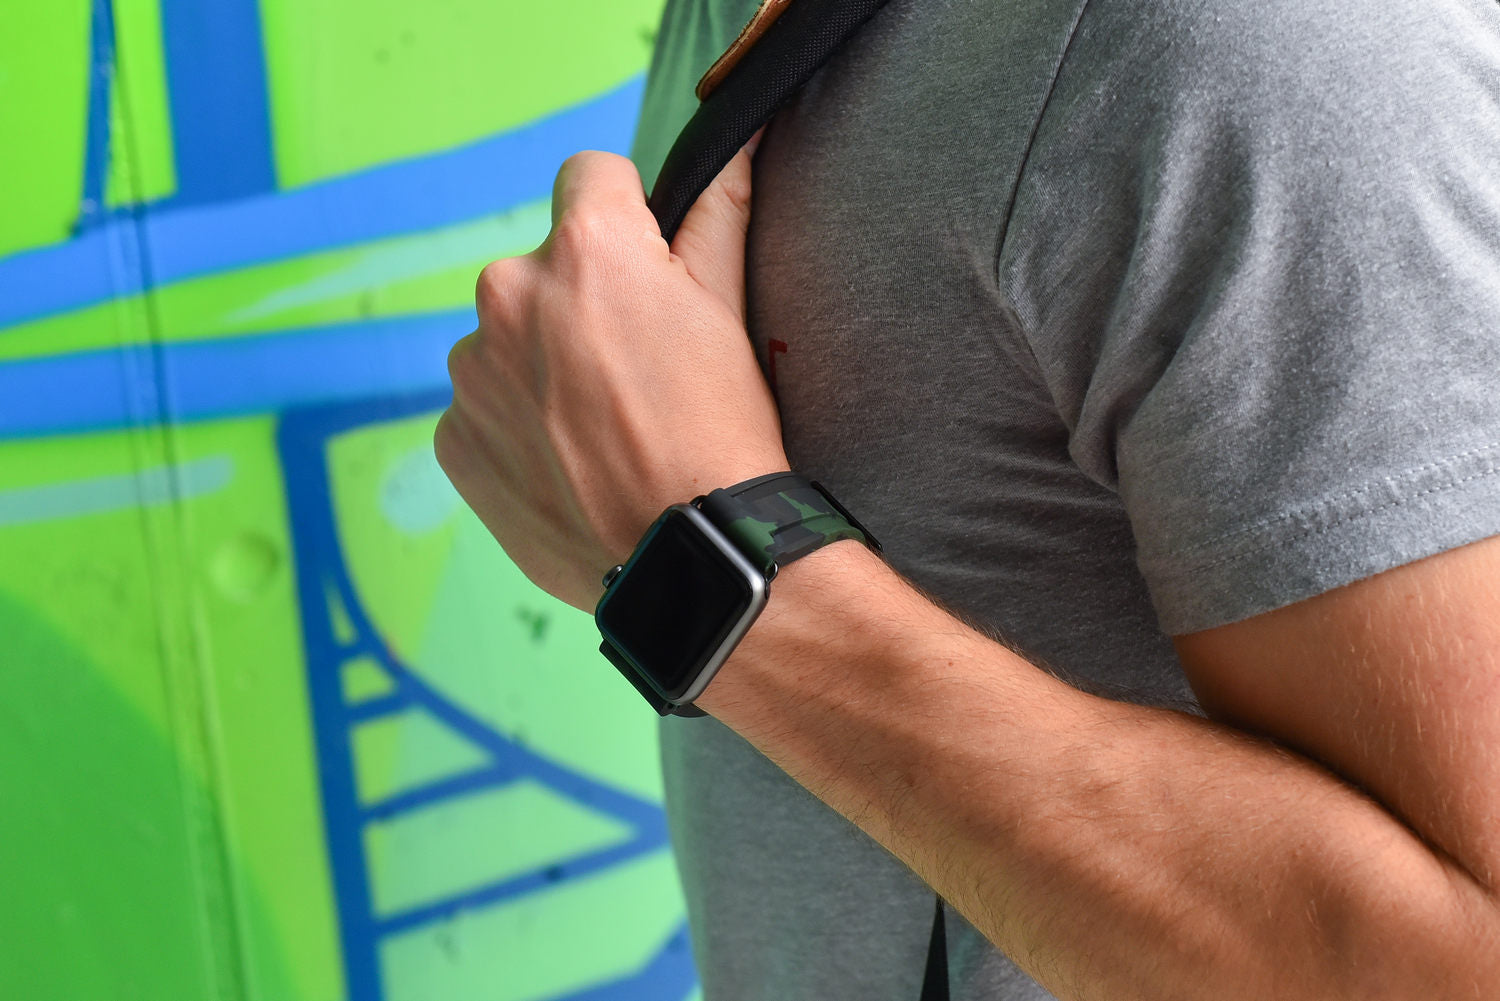 Forrest Green Camo Apple Watch Strap - Apple Watch Strap - Le Luxe Straps